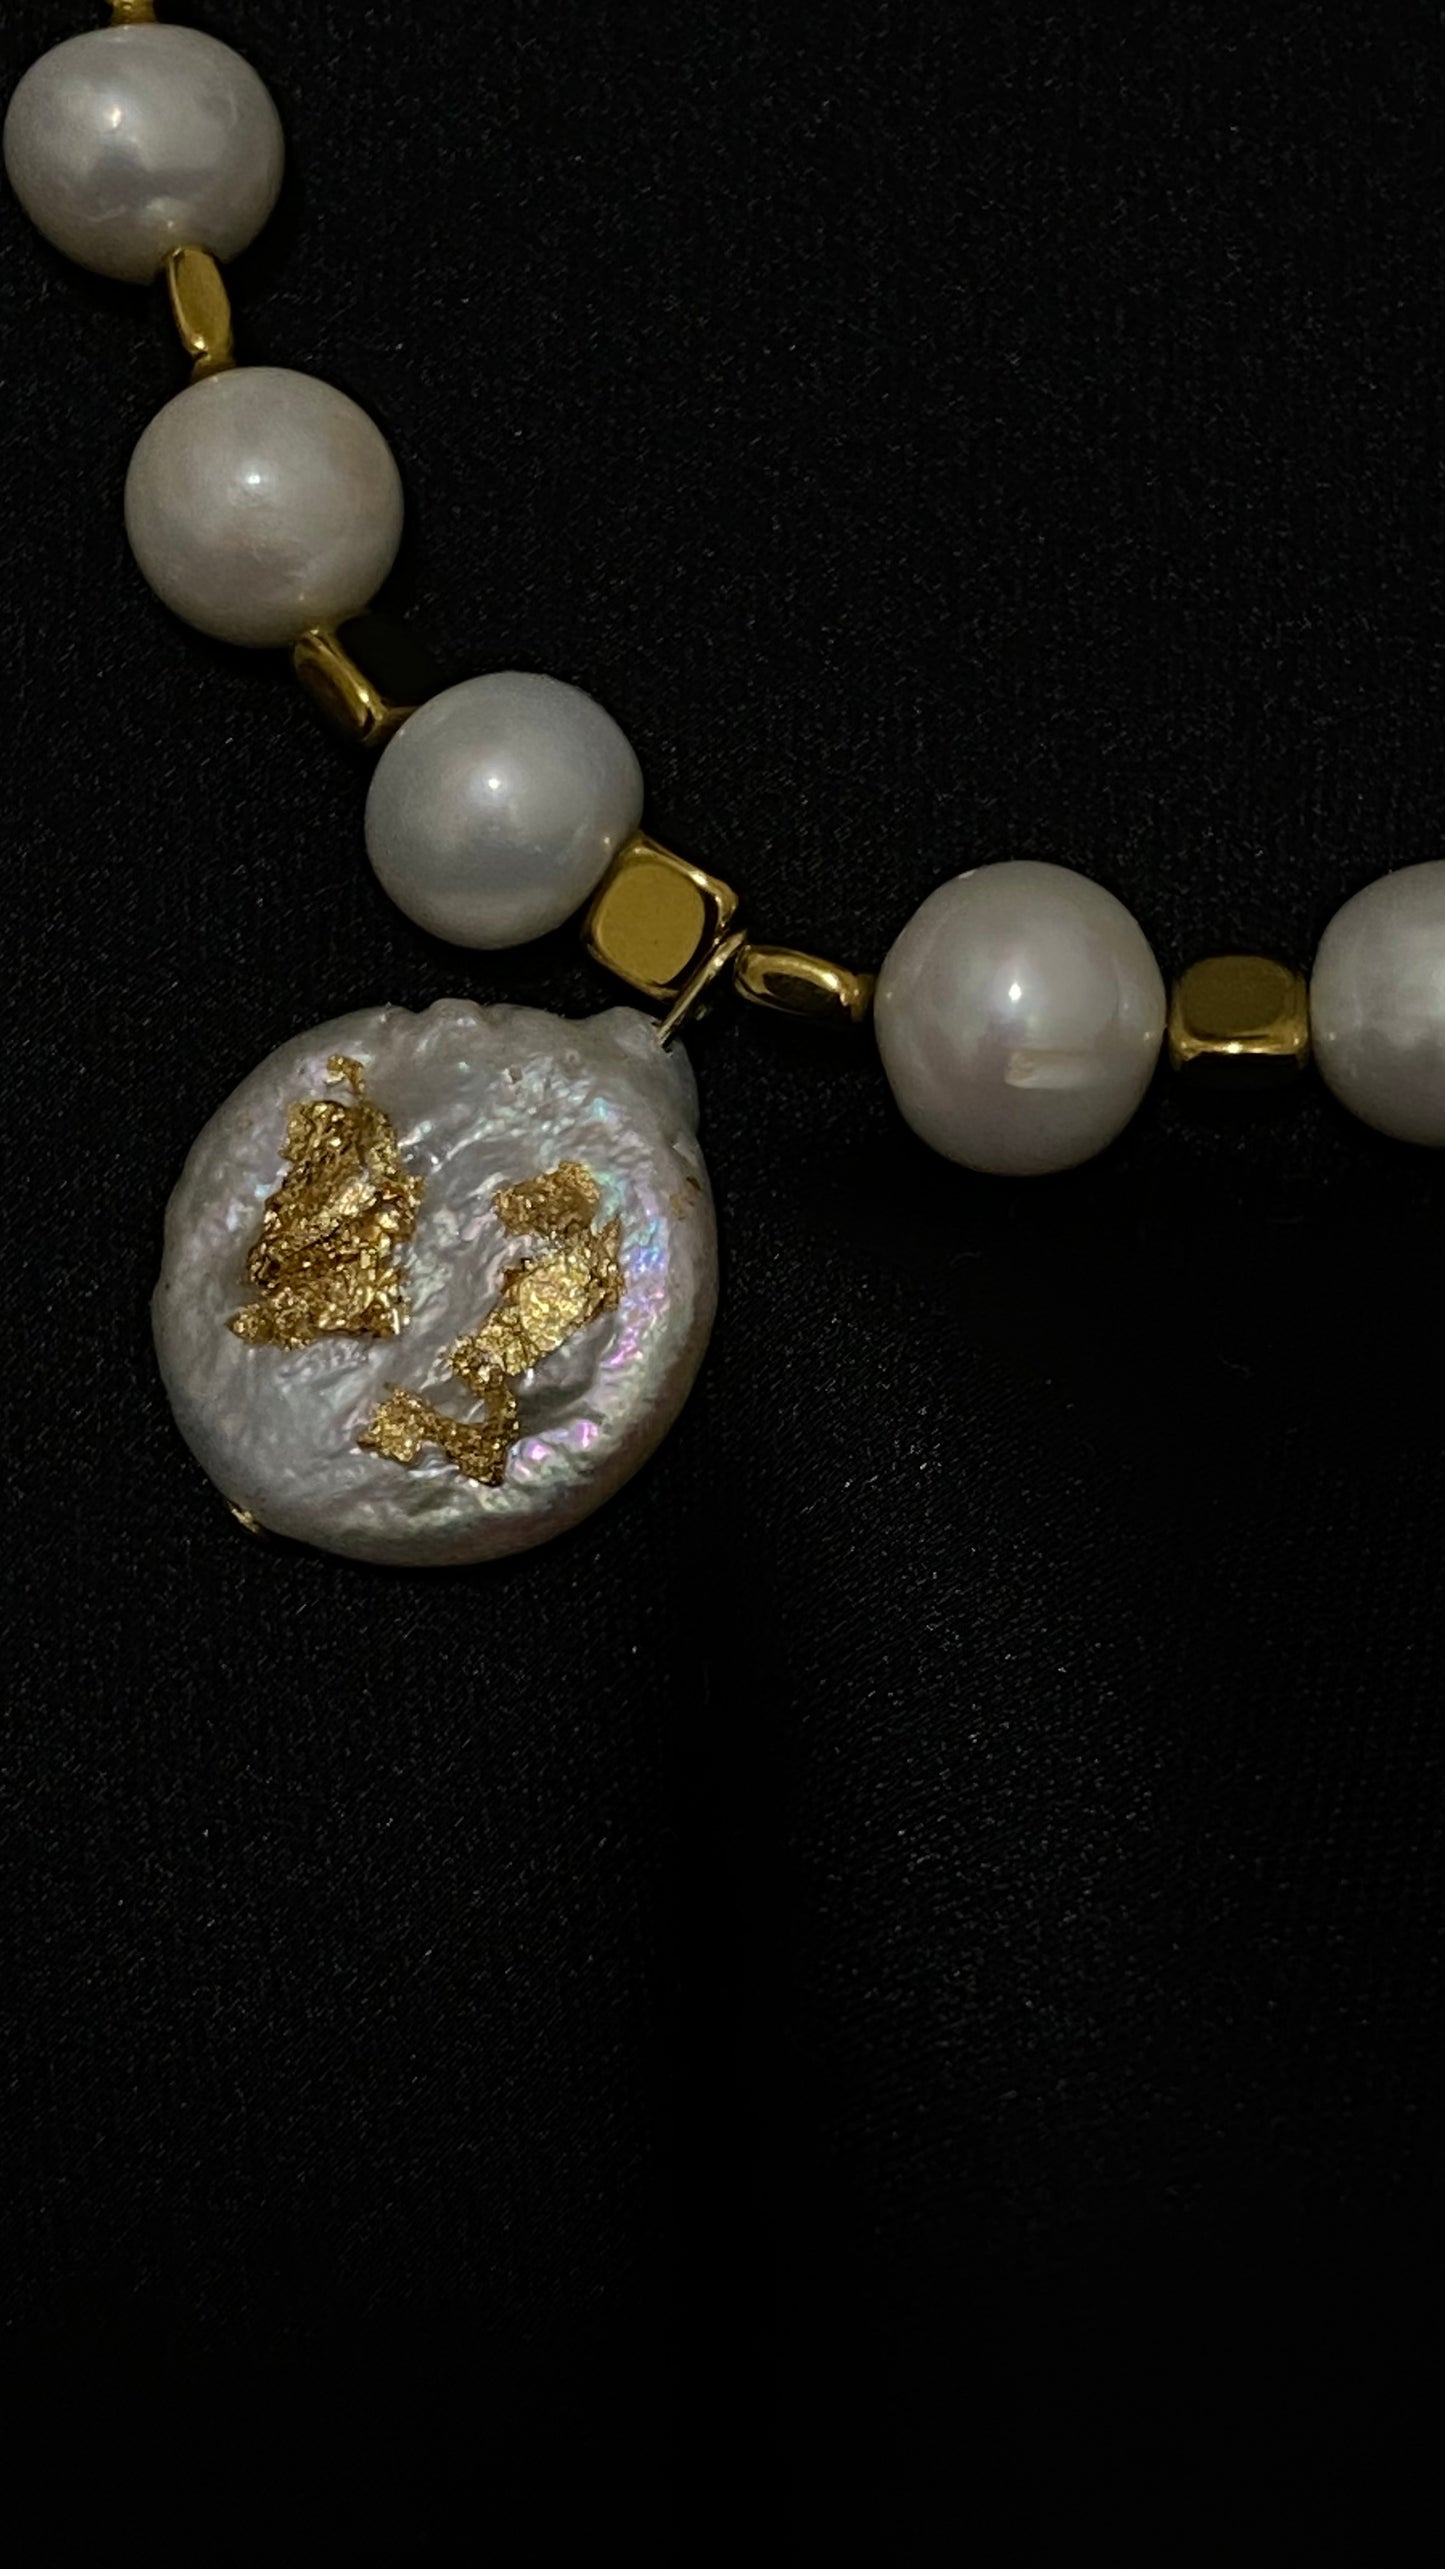 White pearl necklace with pendant